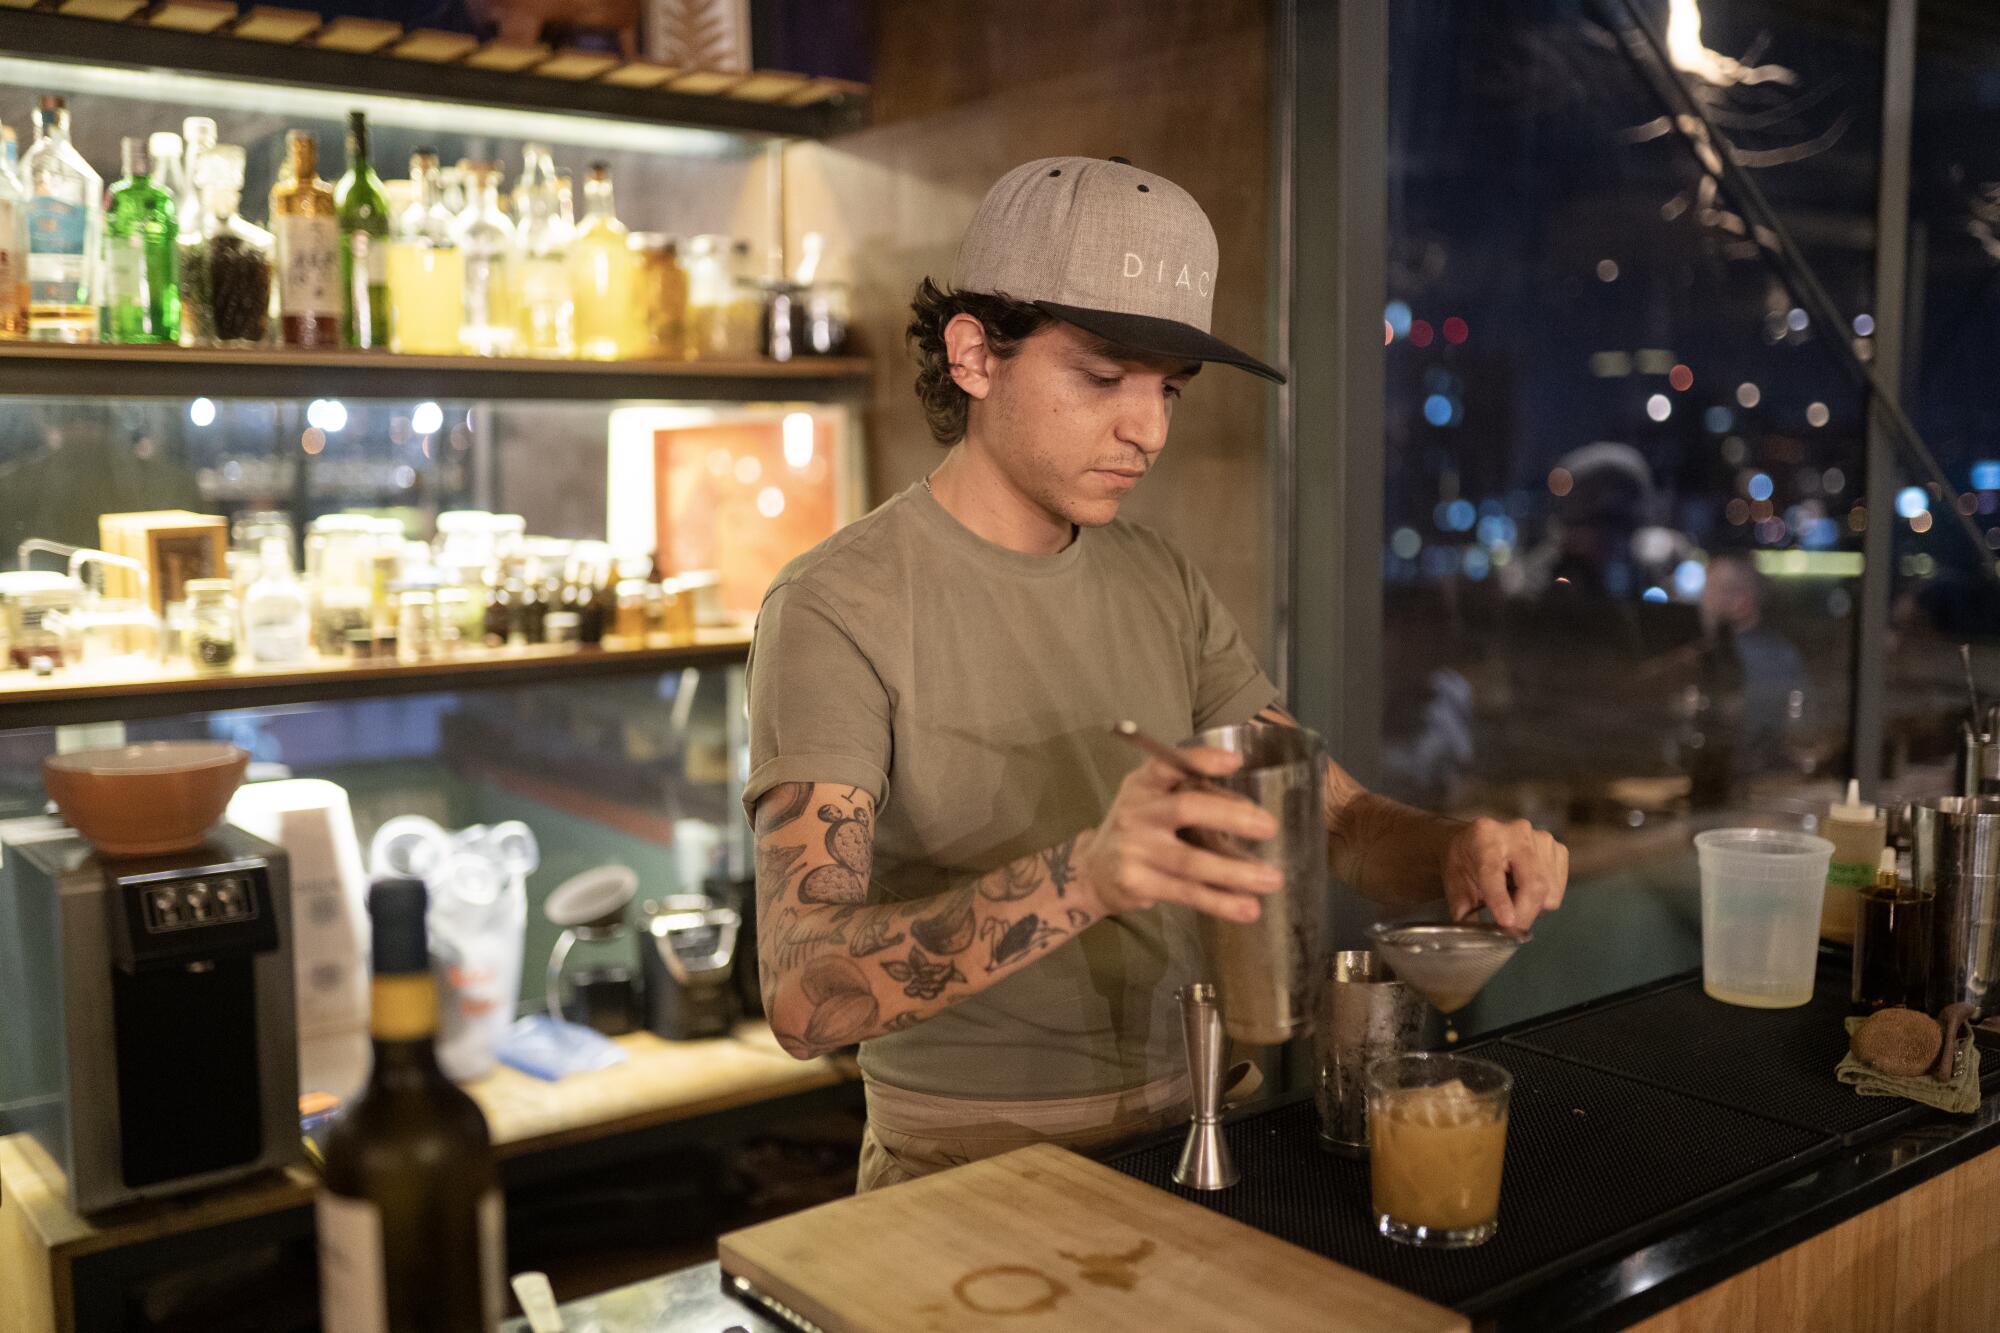 Diacá bar manager Manuel Montepeque prepares drinks with local Guatemalan fruits, including jocote and mamey.